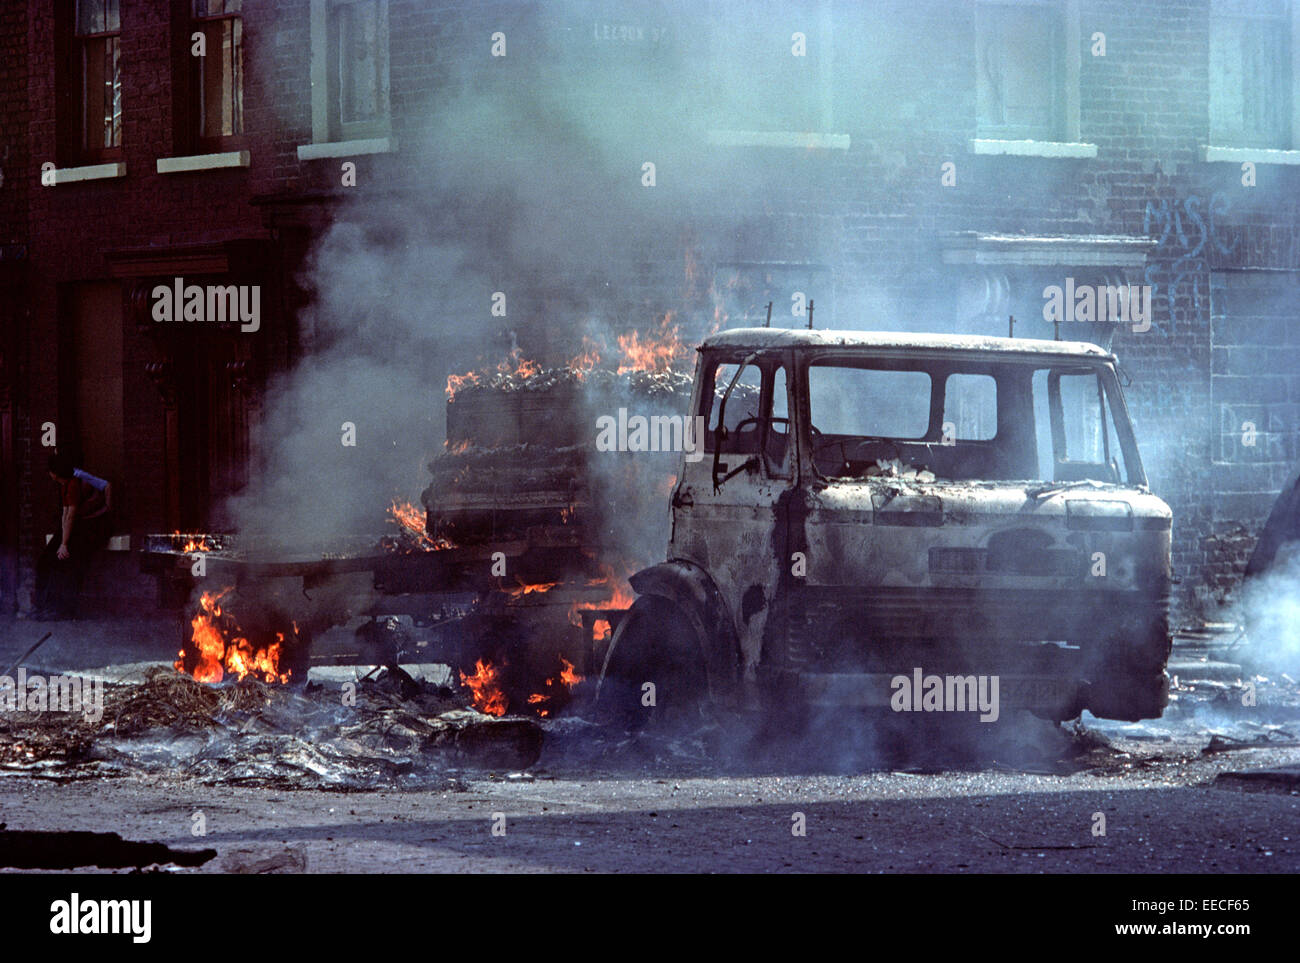 BELFAST, NORTHERN IRELAND - AUGUST 1976. Burning Hijacked Vehicles during Riots on The Falls Road, West Belfast during The Troubles, Northern Ireland. Stock Photo